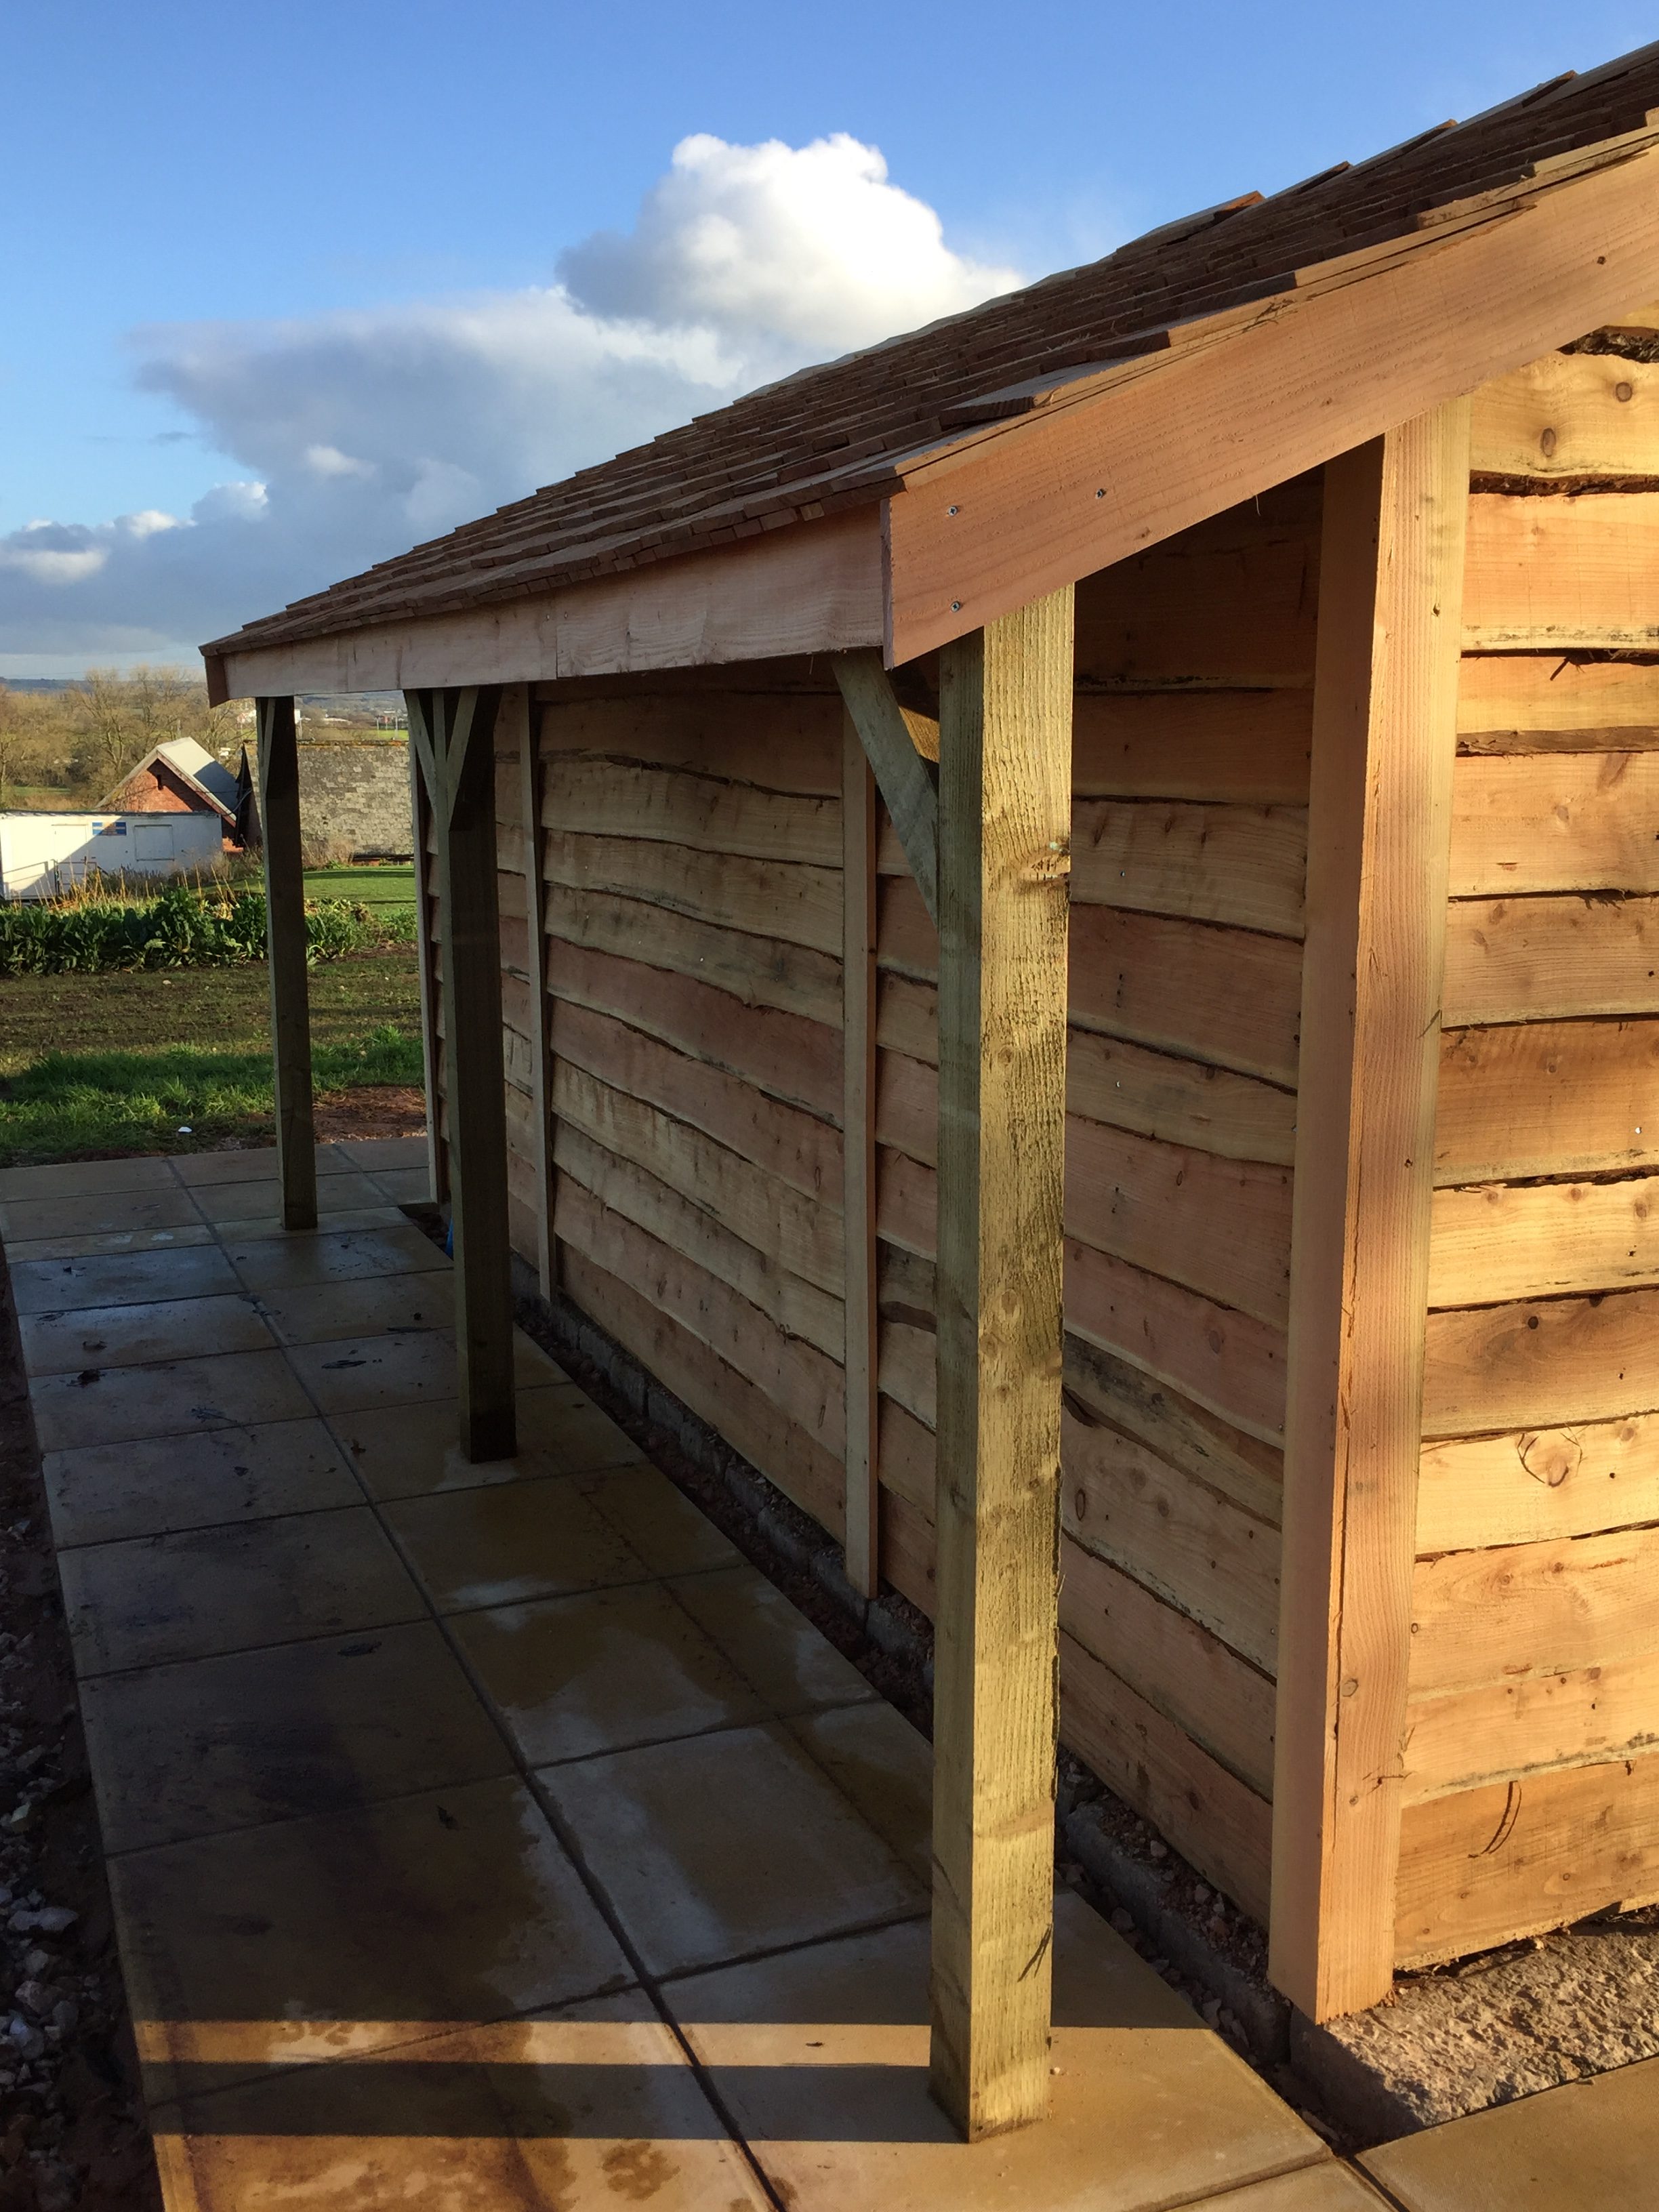 bespoke cedar shingle potting shed with a covered lean too area on the rear of the potting shed